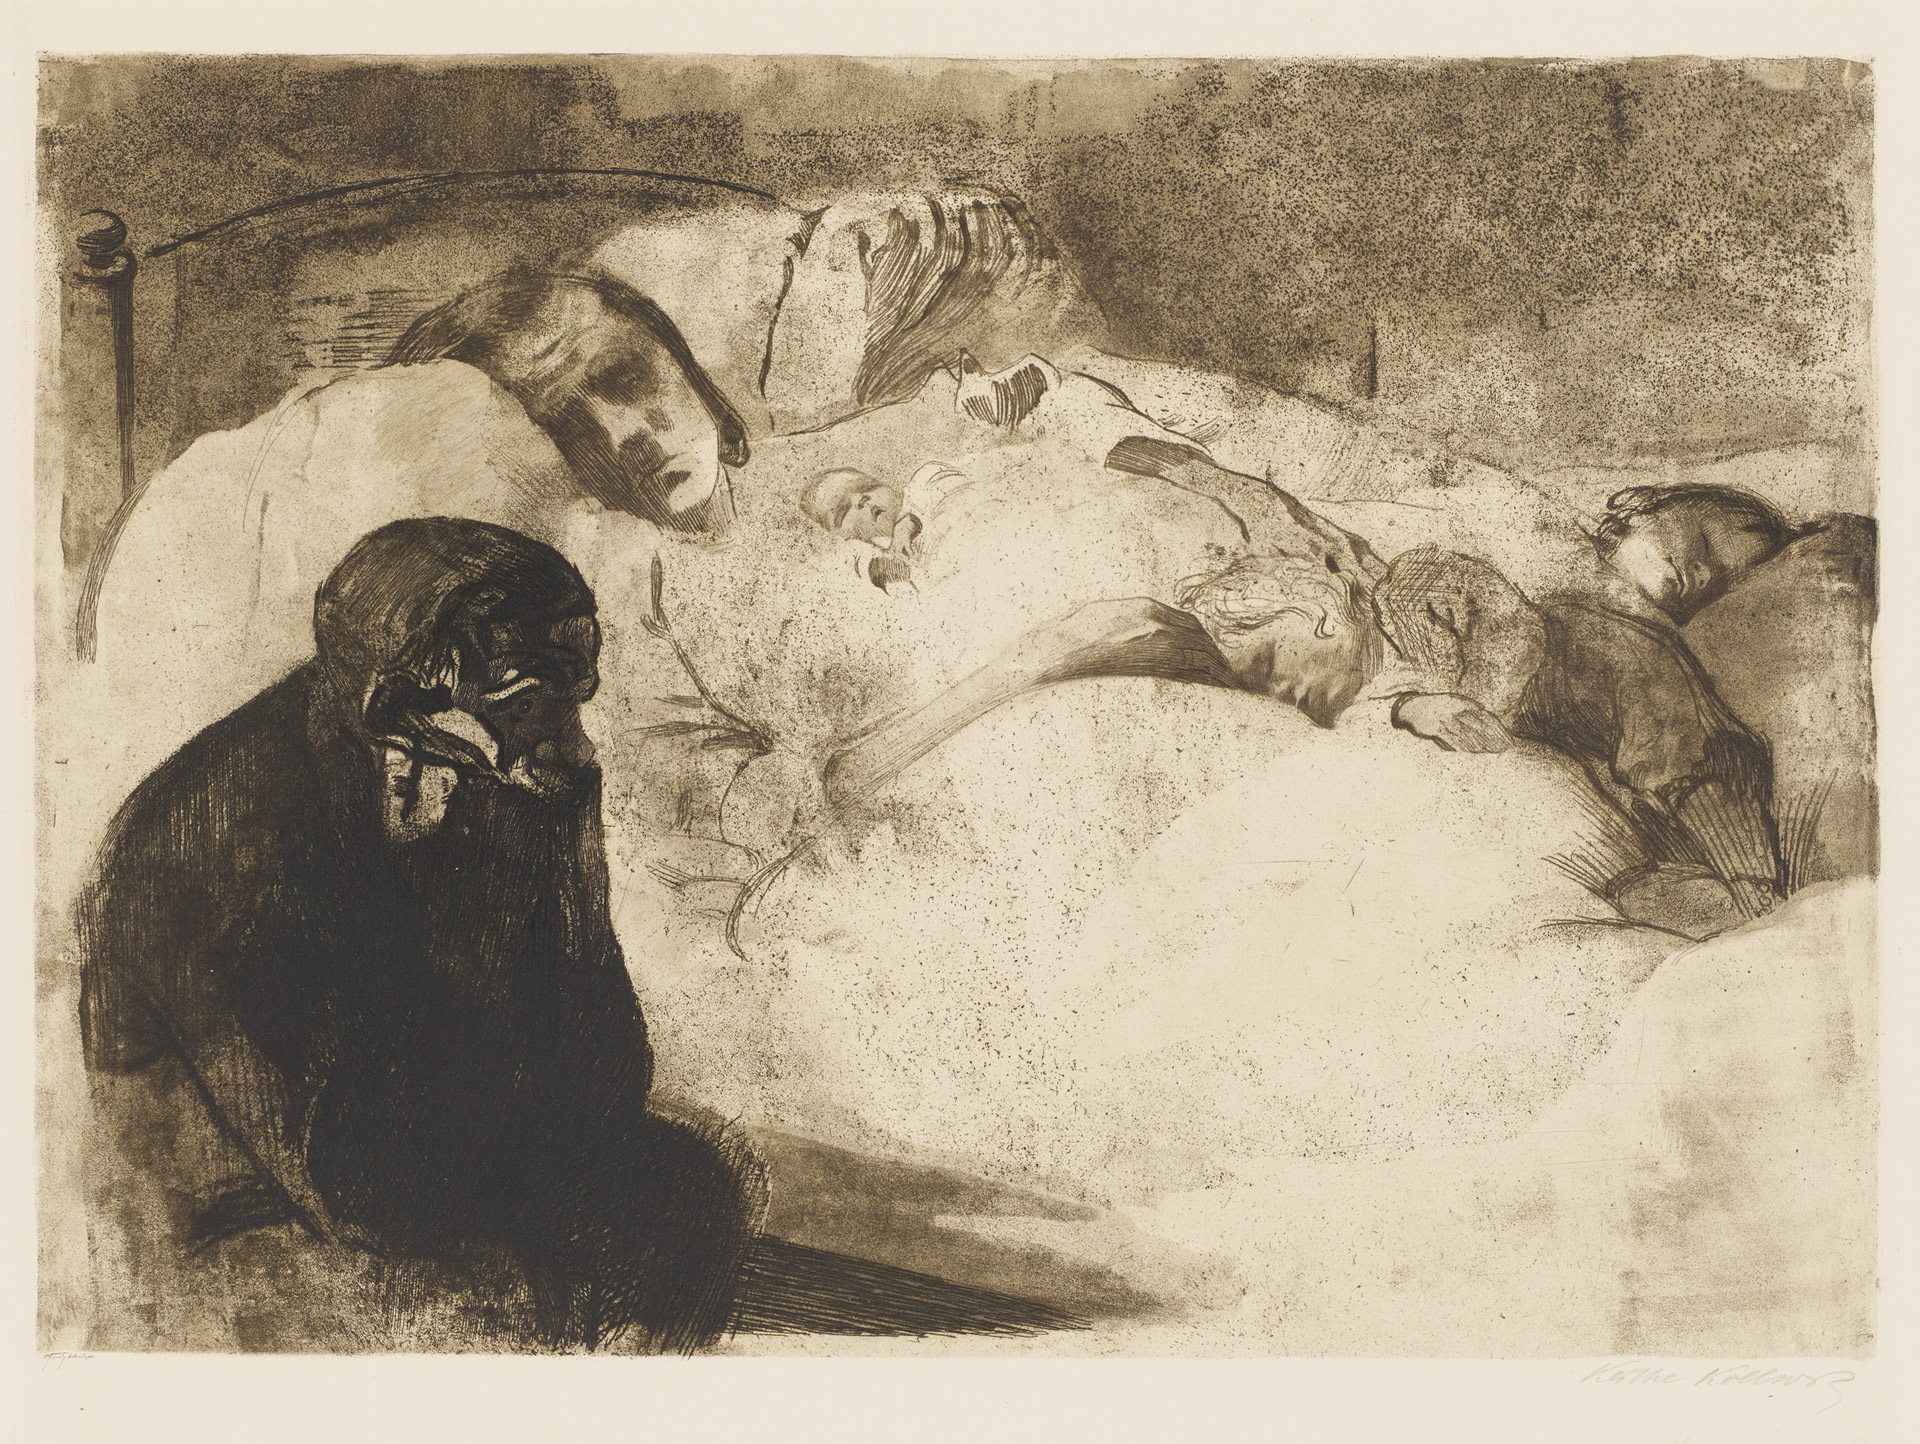 Käthe Kollwitz, Unemployment, 1909, line etching, drypoint, aquatint, sandpaper and soft ground with imprint of Ziegler's transfer paper, Kn 104 VI d, Cologne Kollwitz Collection © Käthe Kollwitz Museum Köln